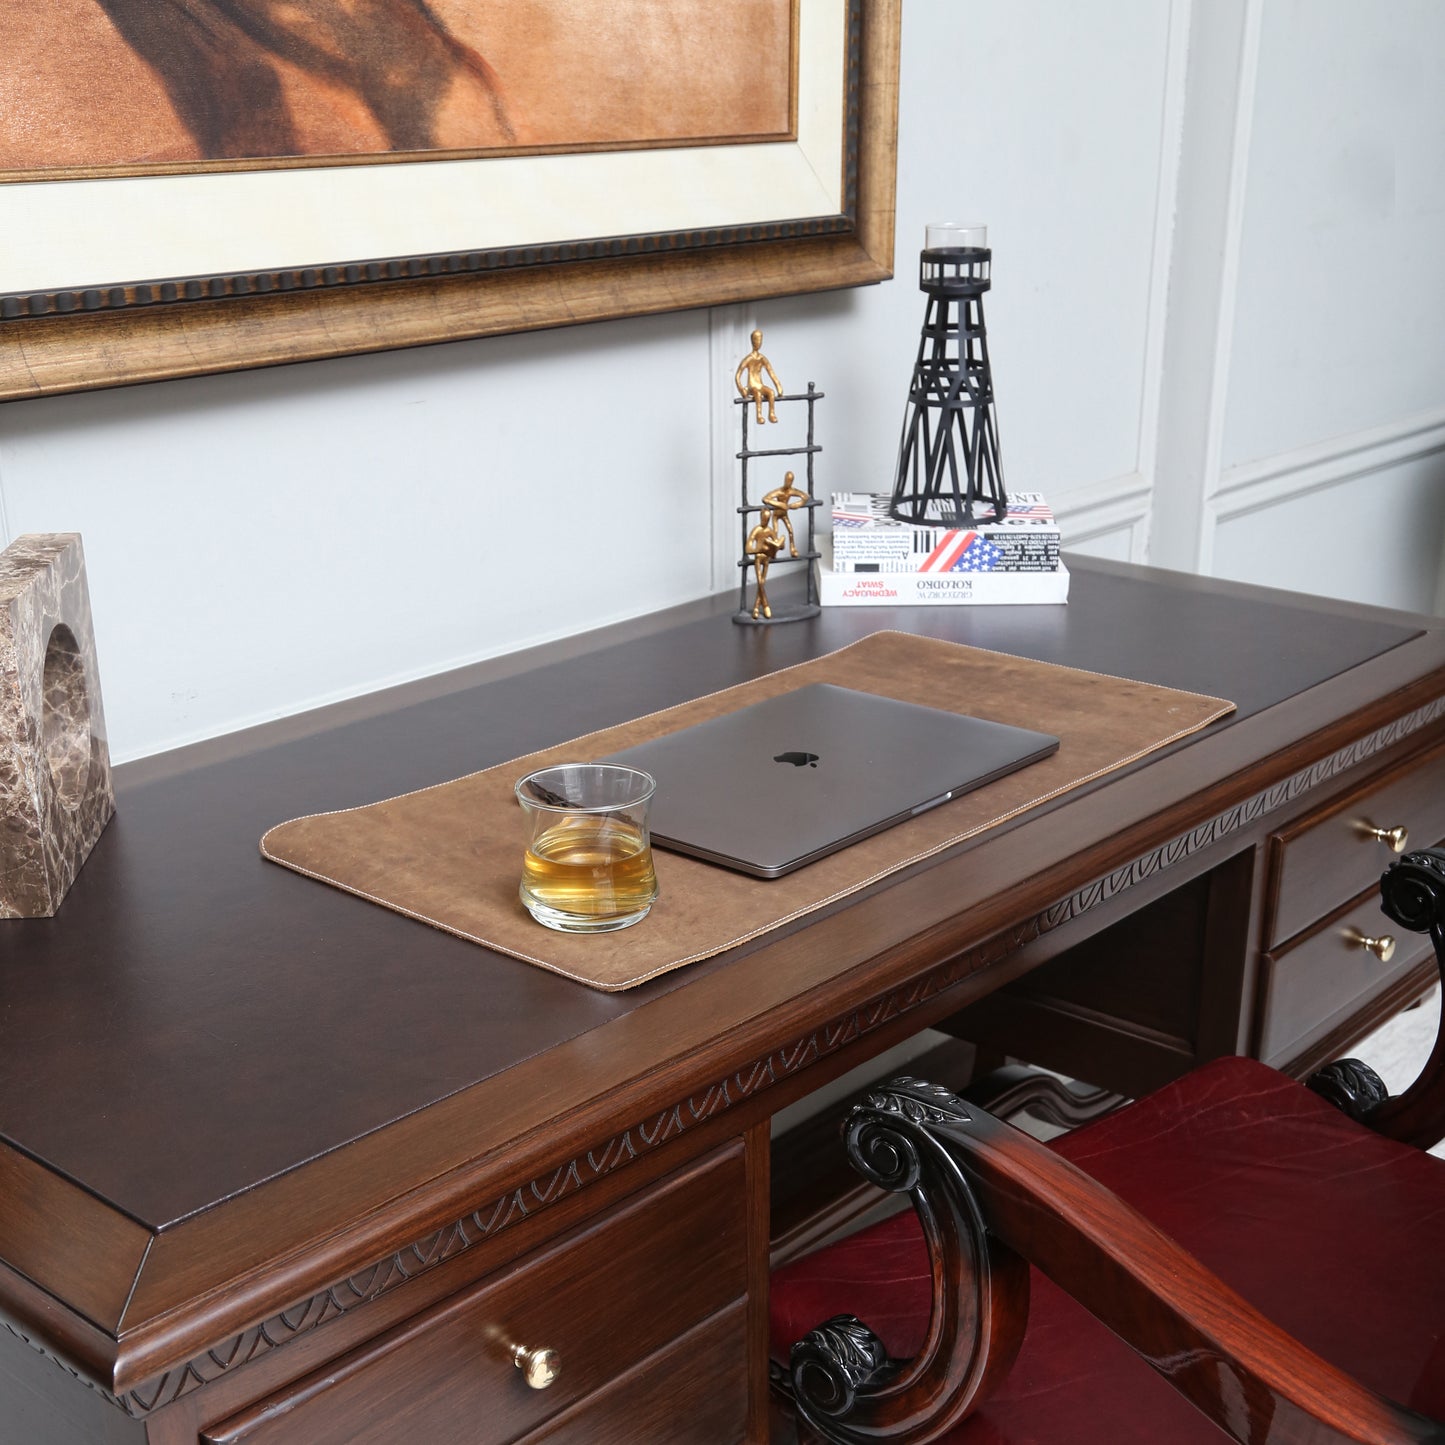 Leather Desk & Laptop Mat (Chocolate Brown)